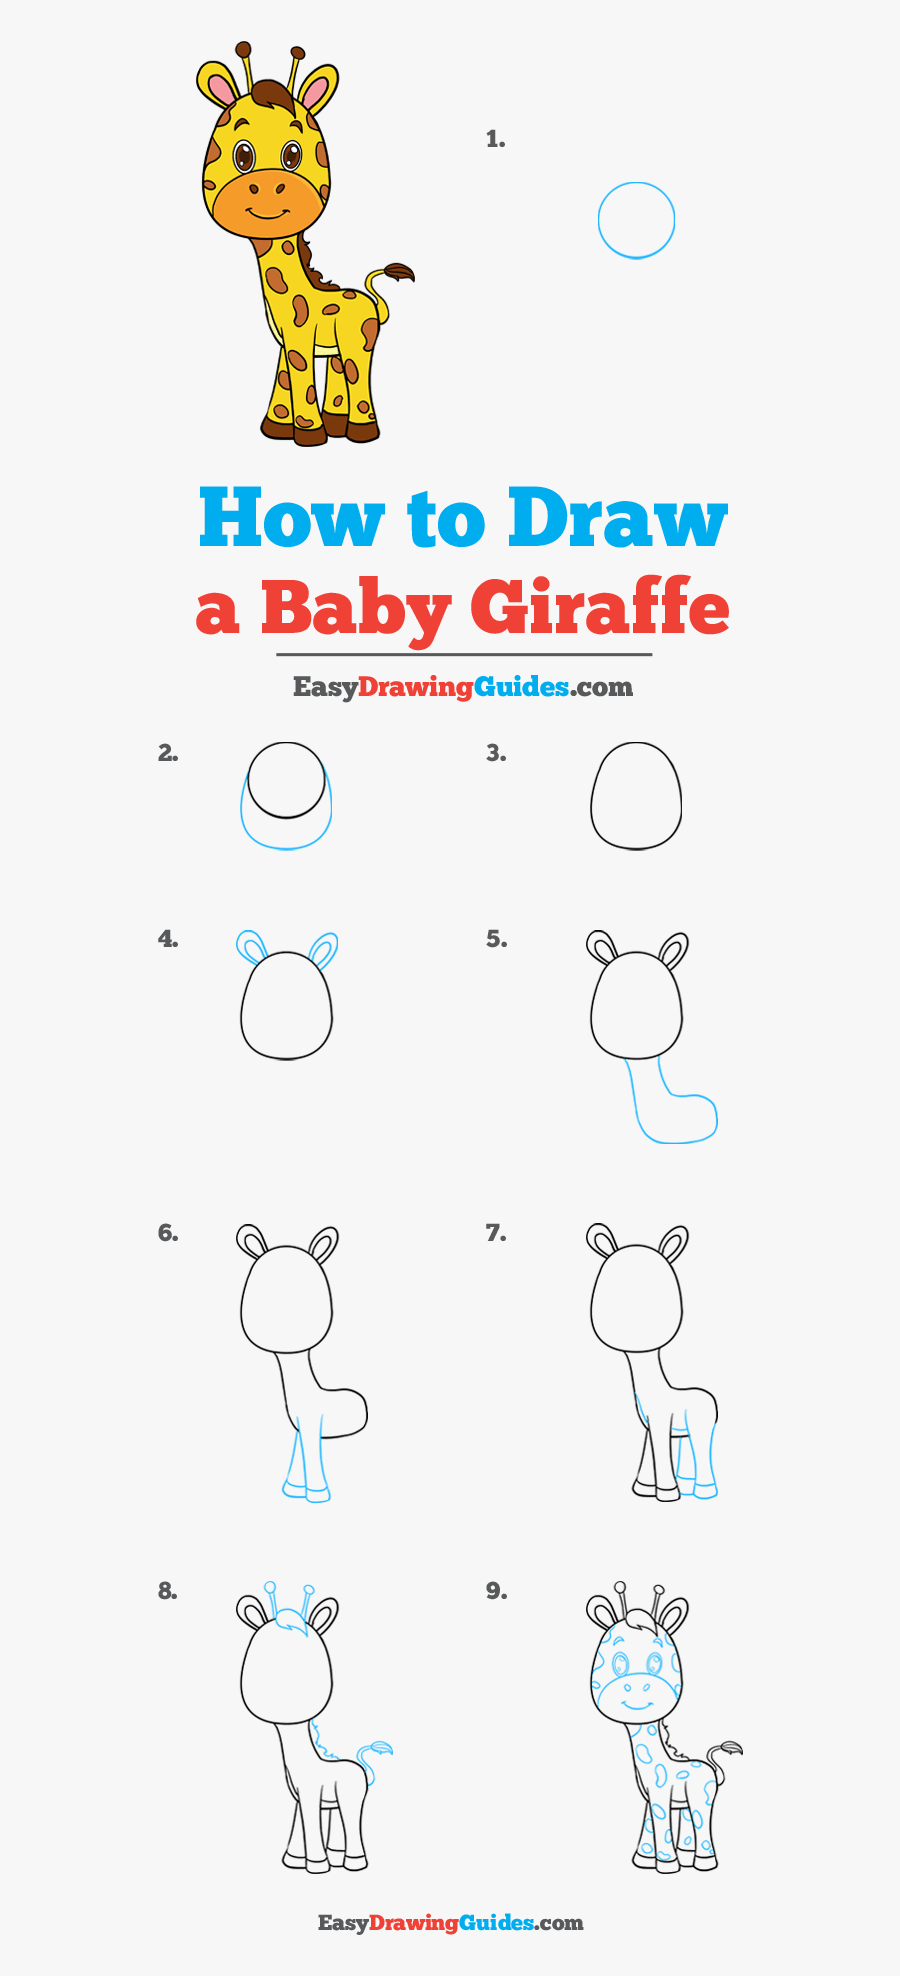 How To Draw Baby Giraffe - Easy Thumbs Up Drawing, Transparent Clipart